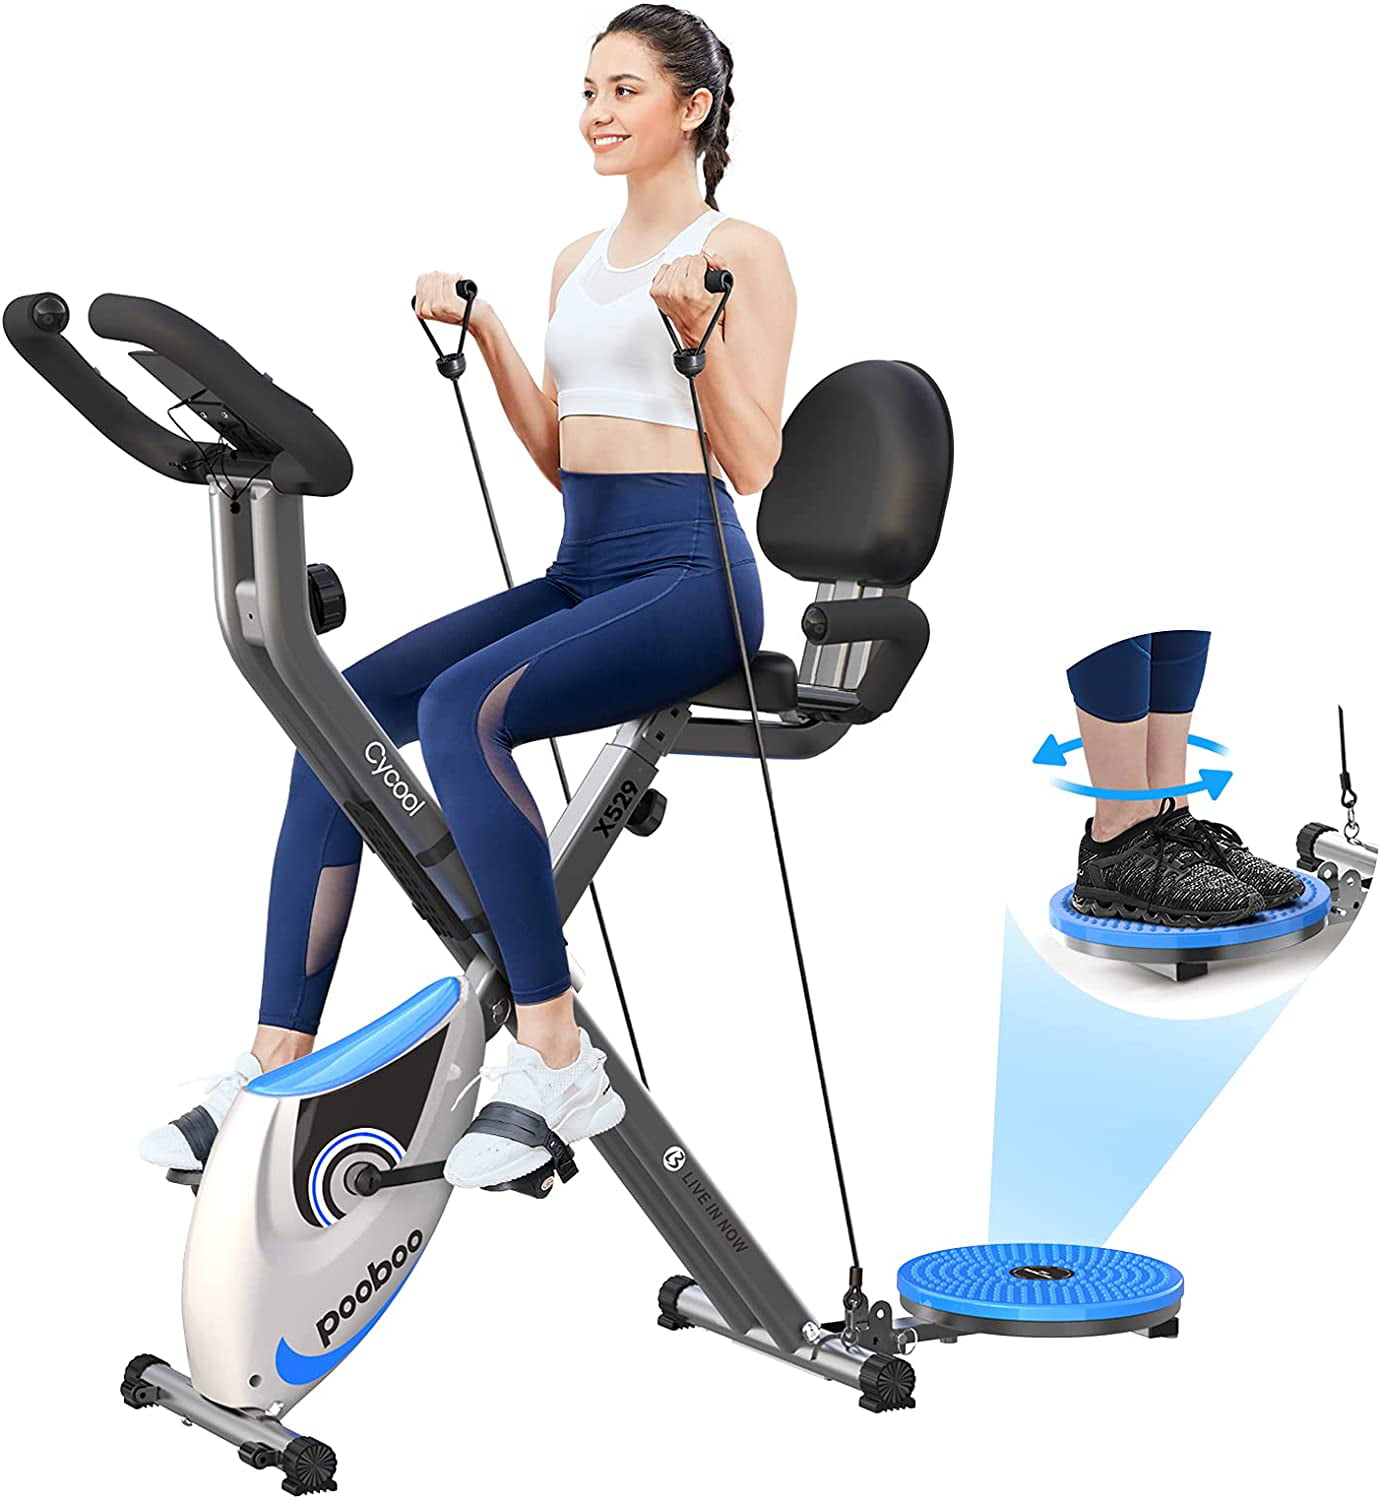 Details about   Magnetic Exercise Bike Folding Adjustable Stationary Cycling Home Cardio Workout 